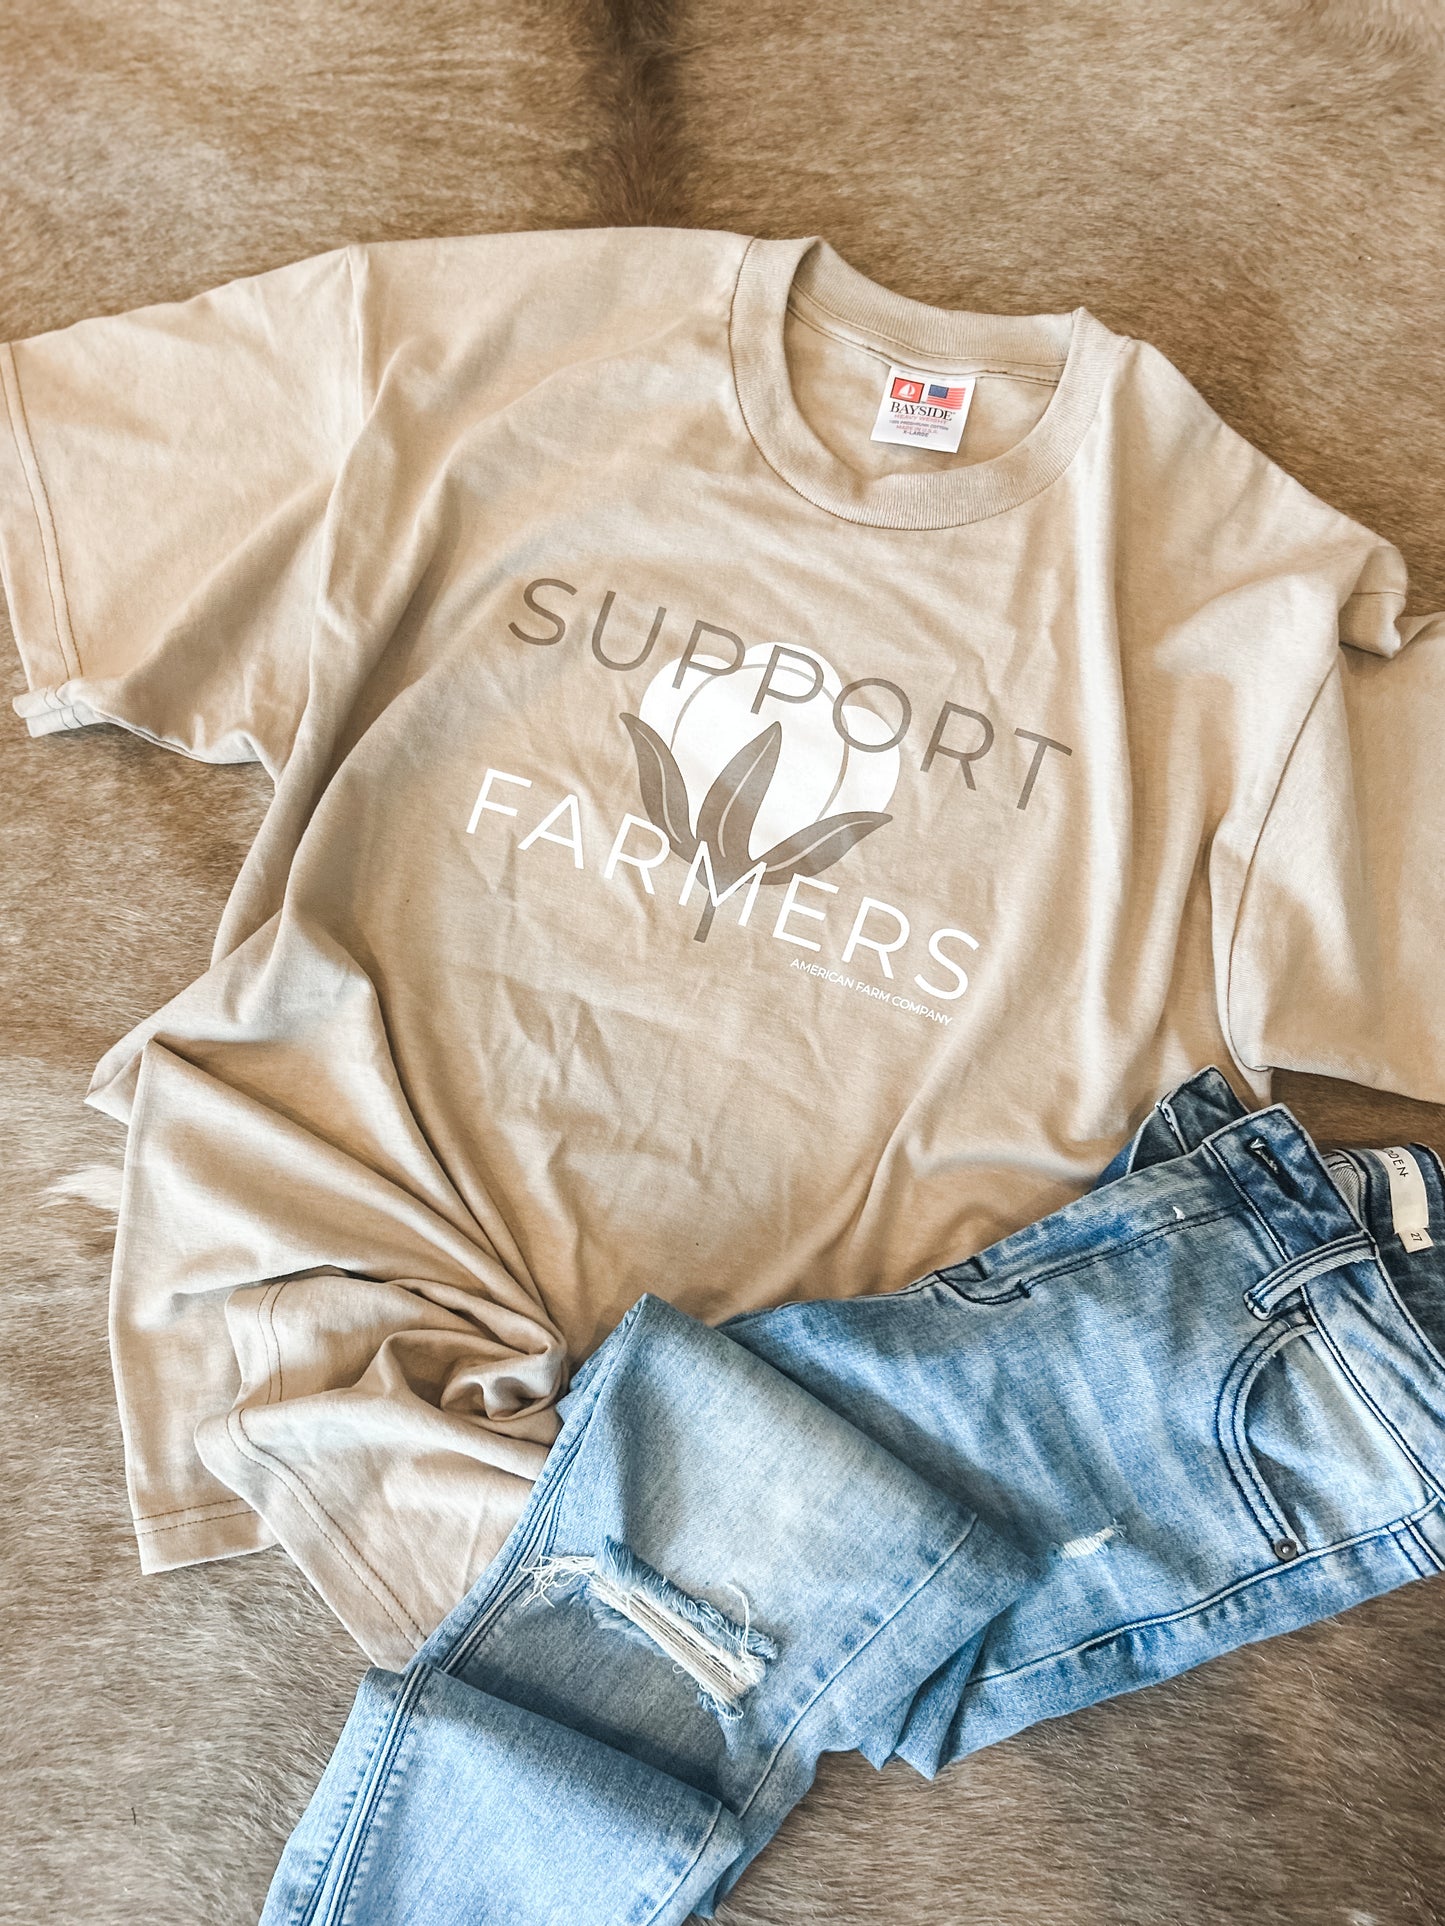 'Support Farmers' USA Cotton Tee (Made In America)